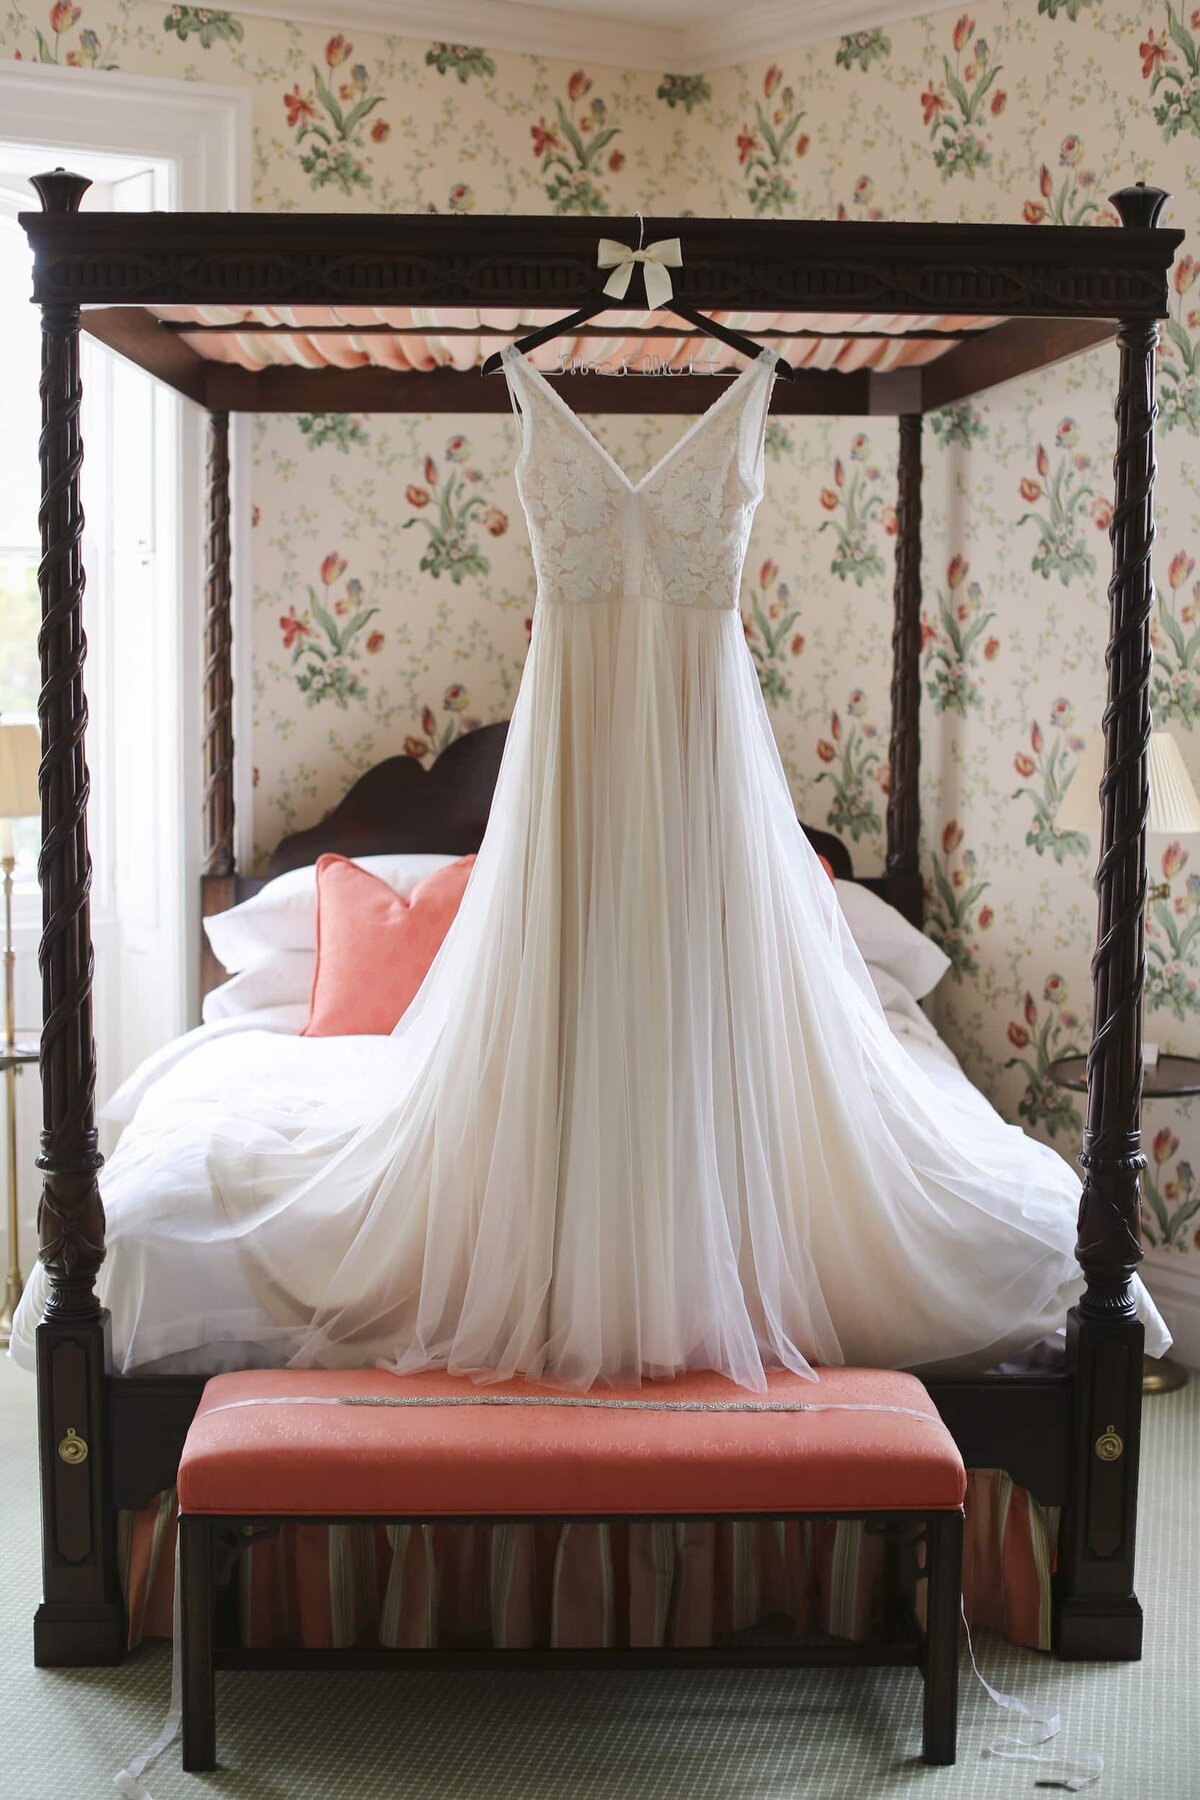 Wedding dress hanging from poster bed